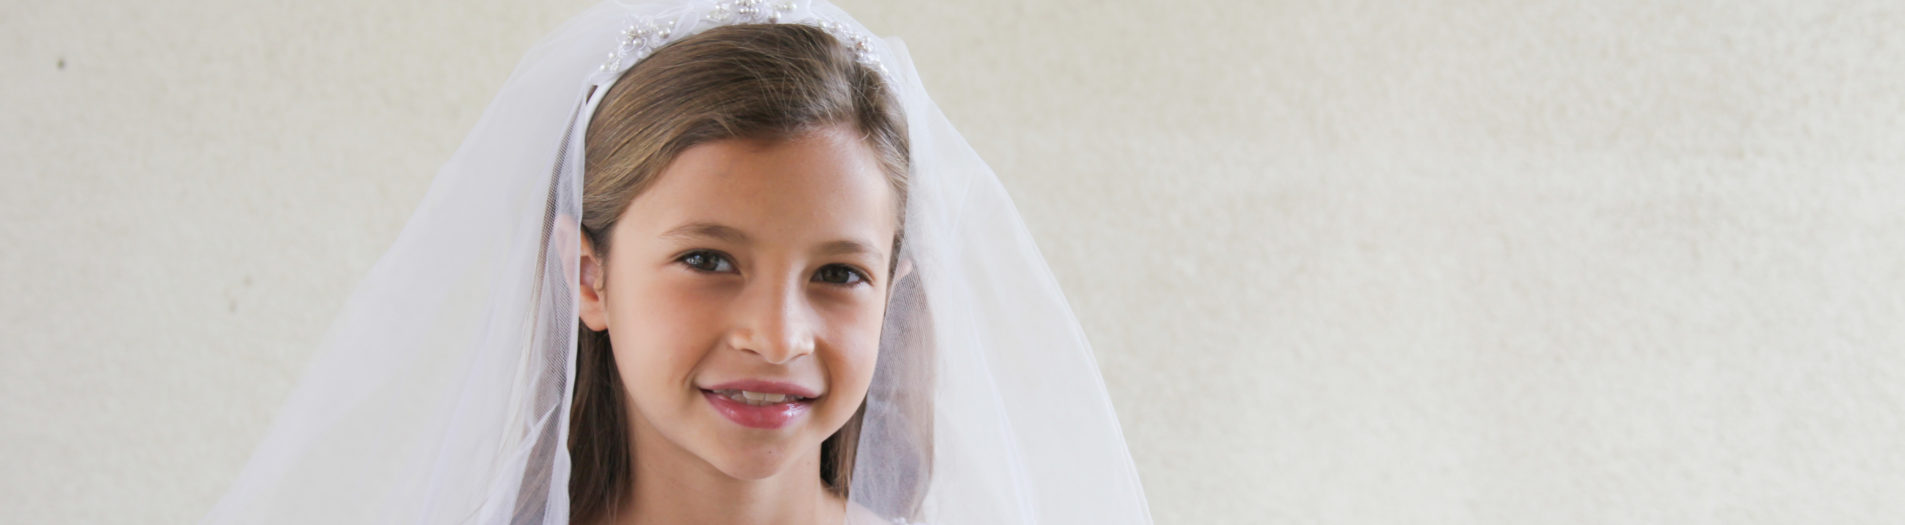 First Communion Portraits have taught me that every child has a song in their heart | San Carlos, CA Photographer | Chapel Hill, NC Photographer